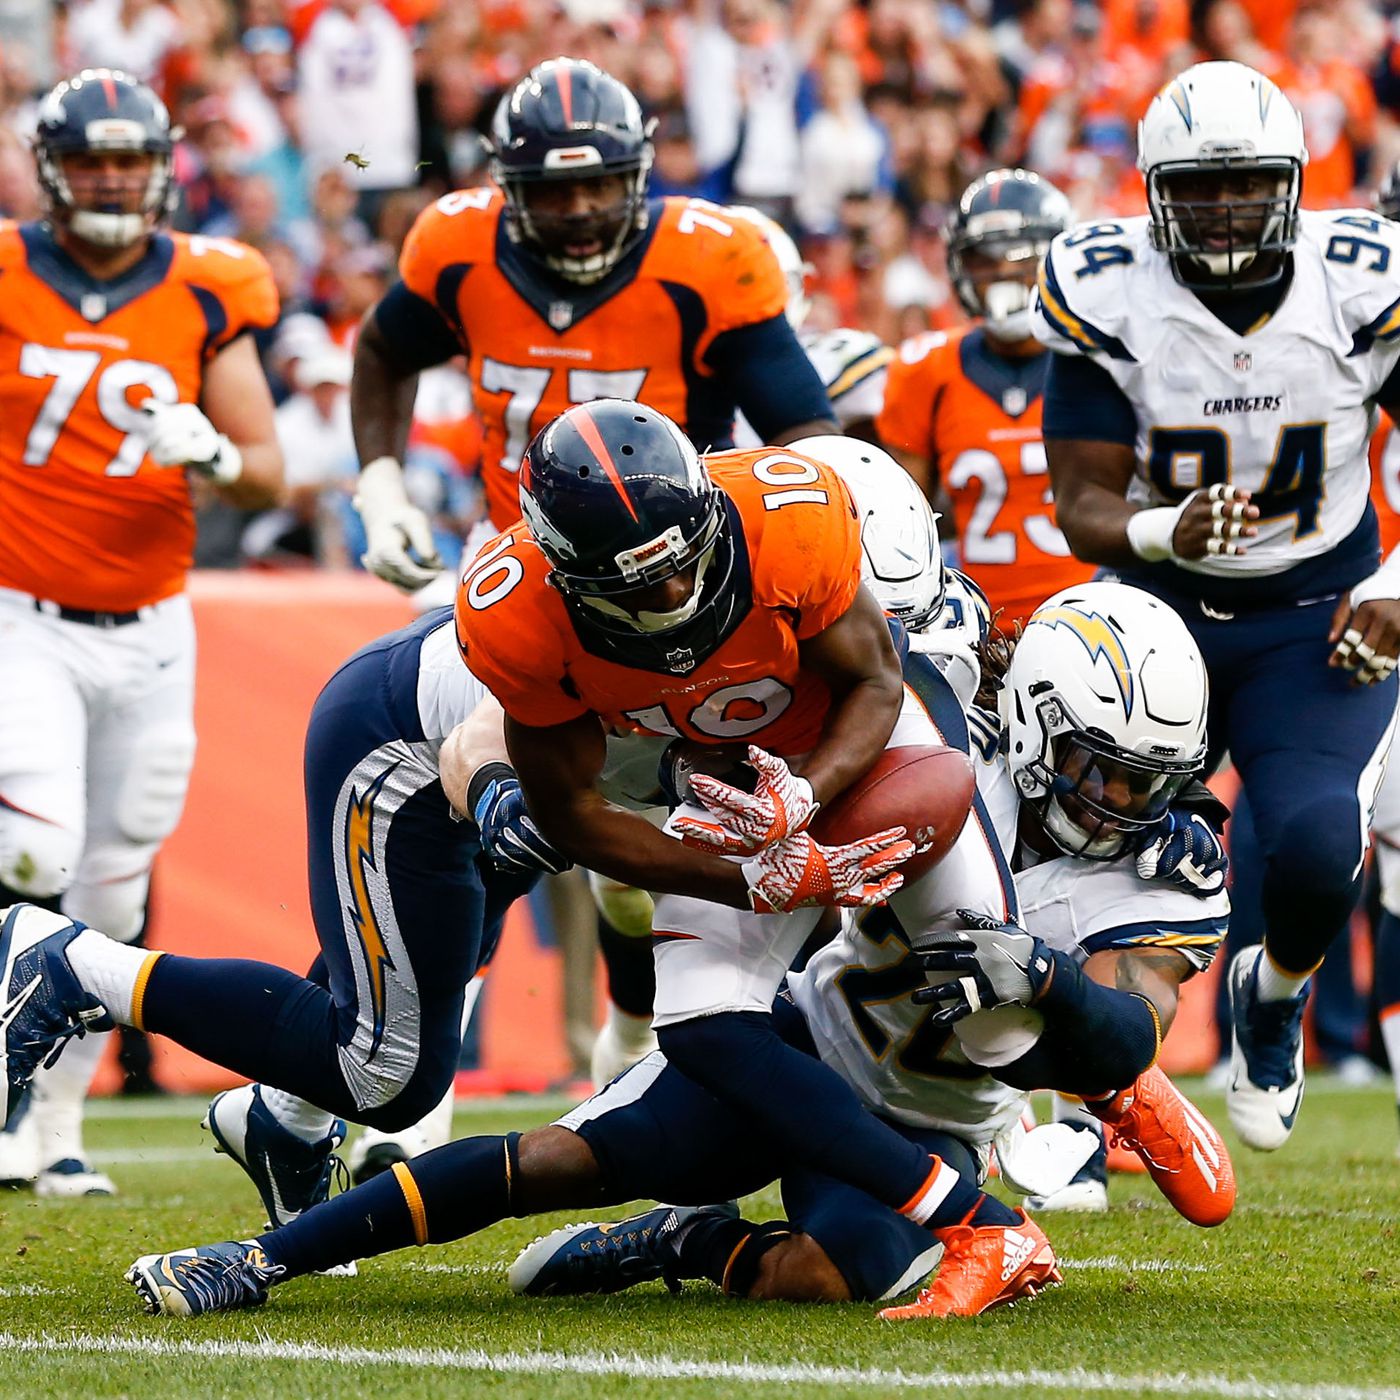 Broncos favored by 3.5 over Chargers on Monday Night Football in